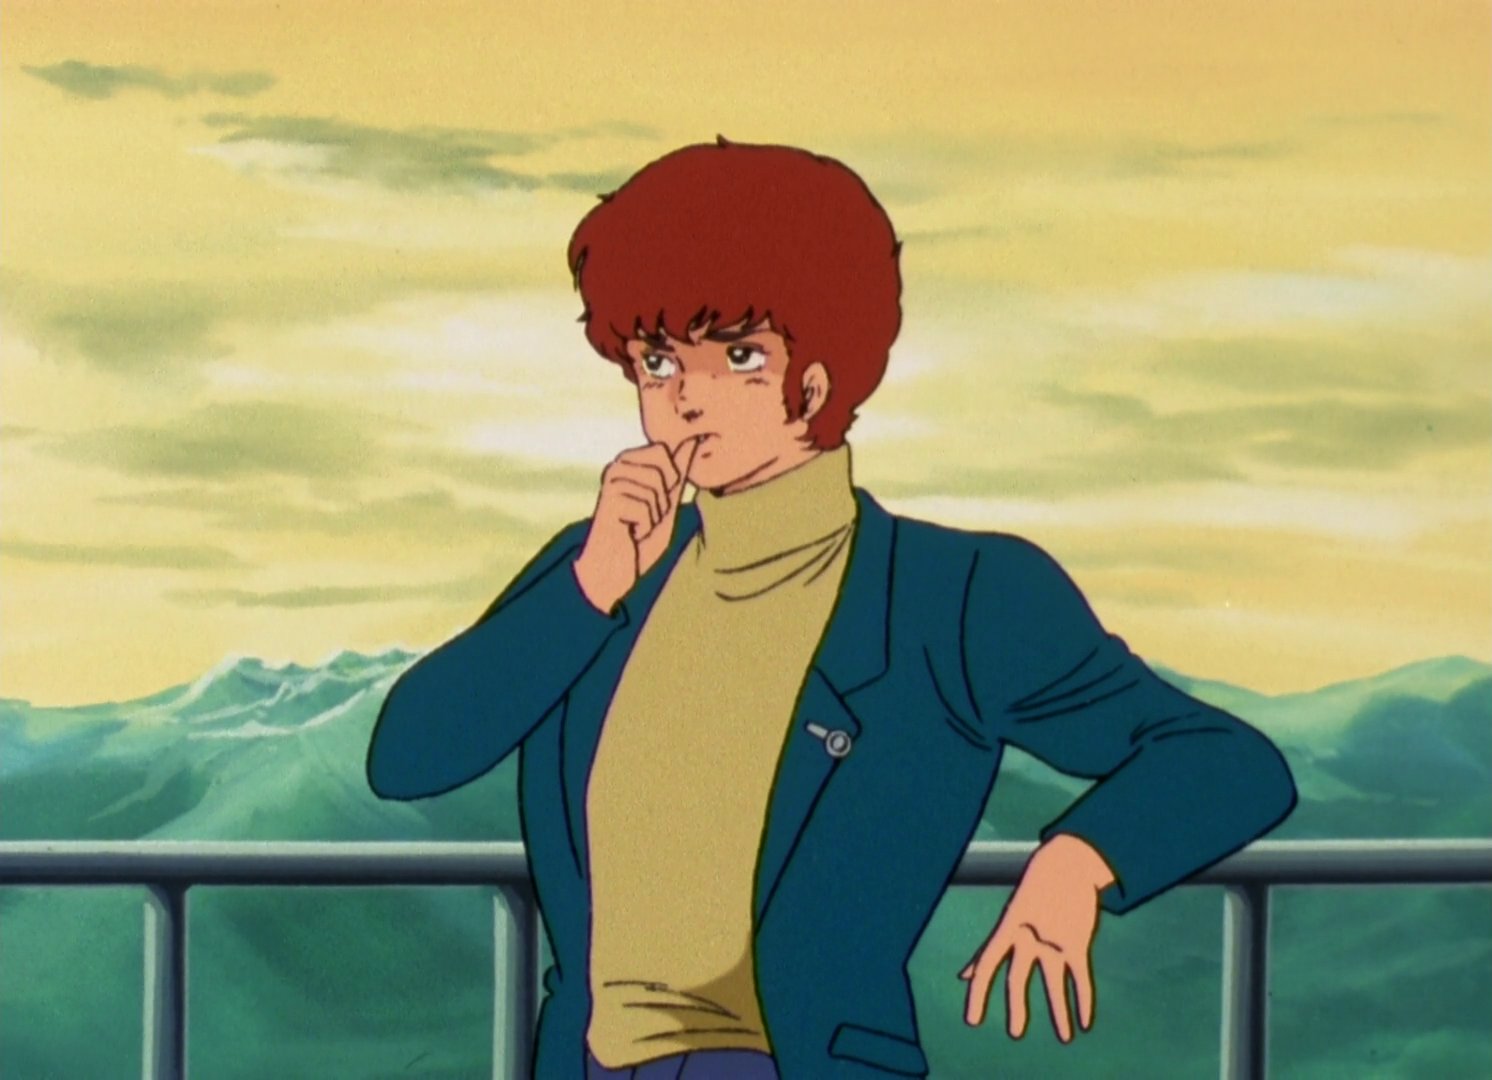 Amuro Ray, slightly older than in 79, leaning back on a railing and biting his thumb.